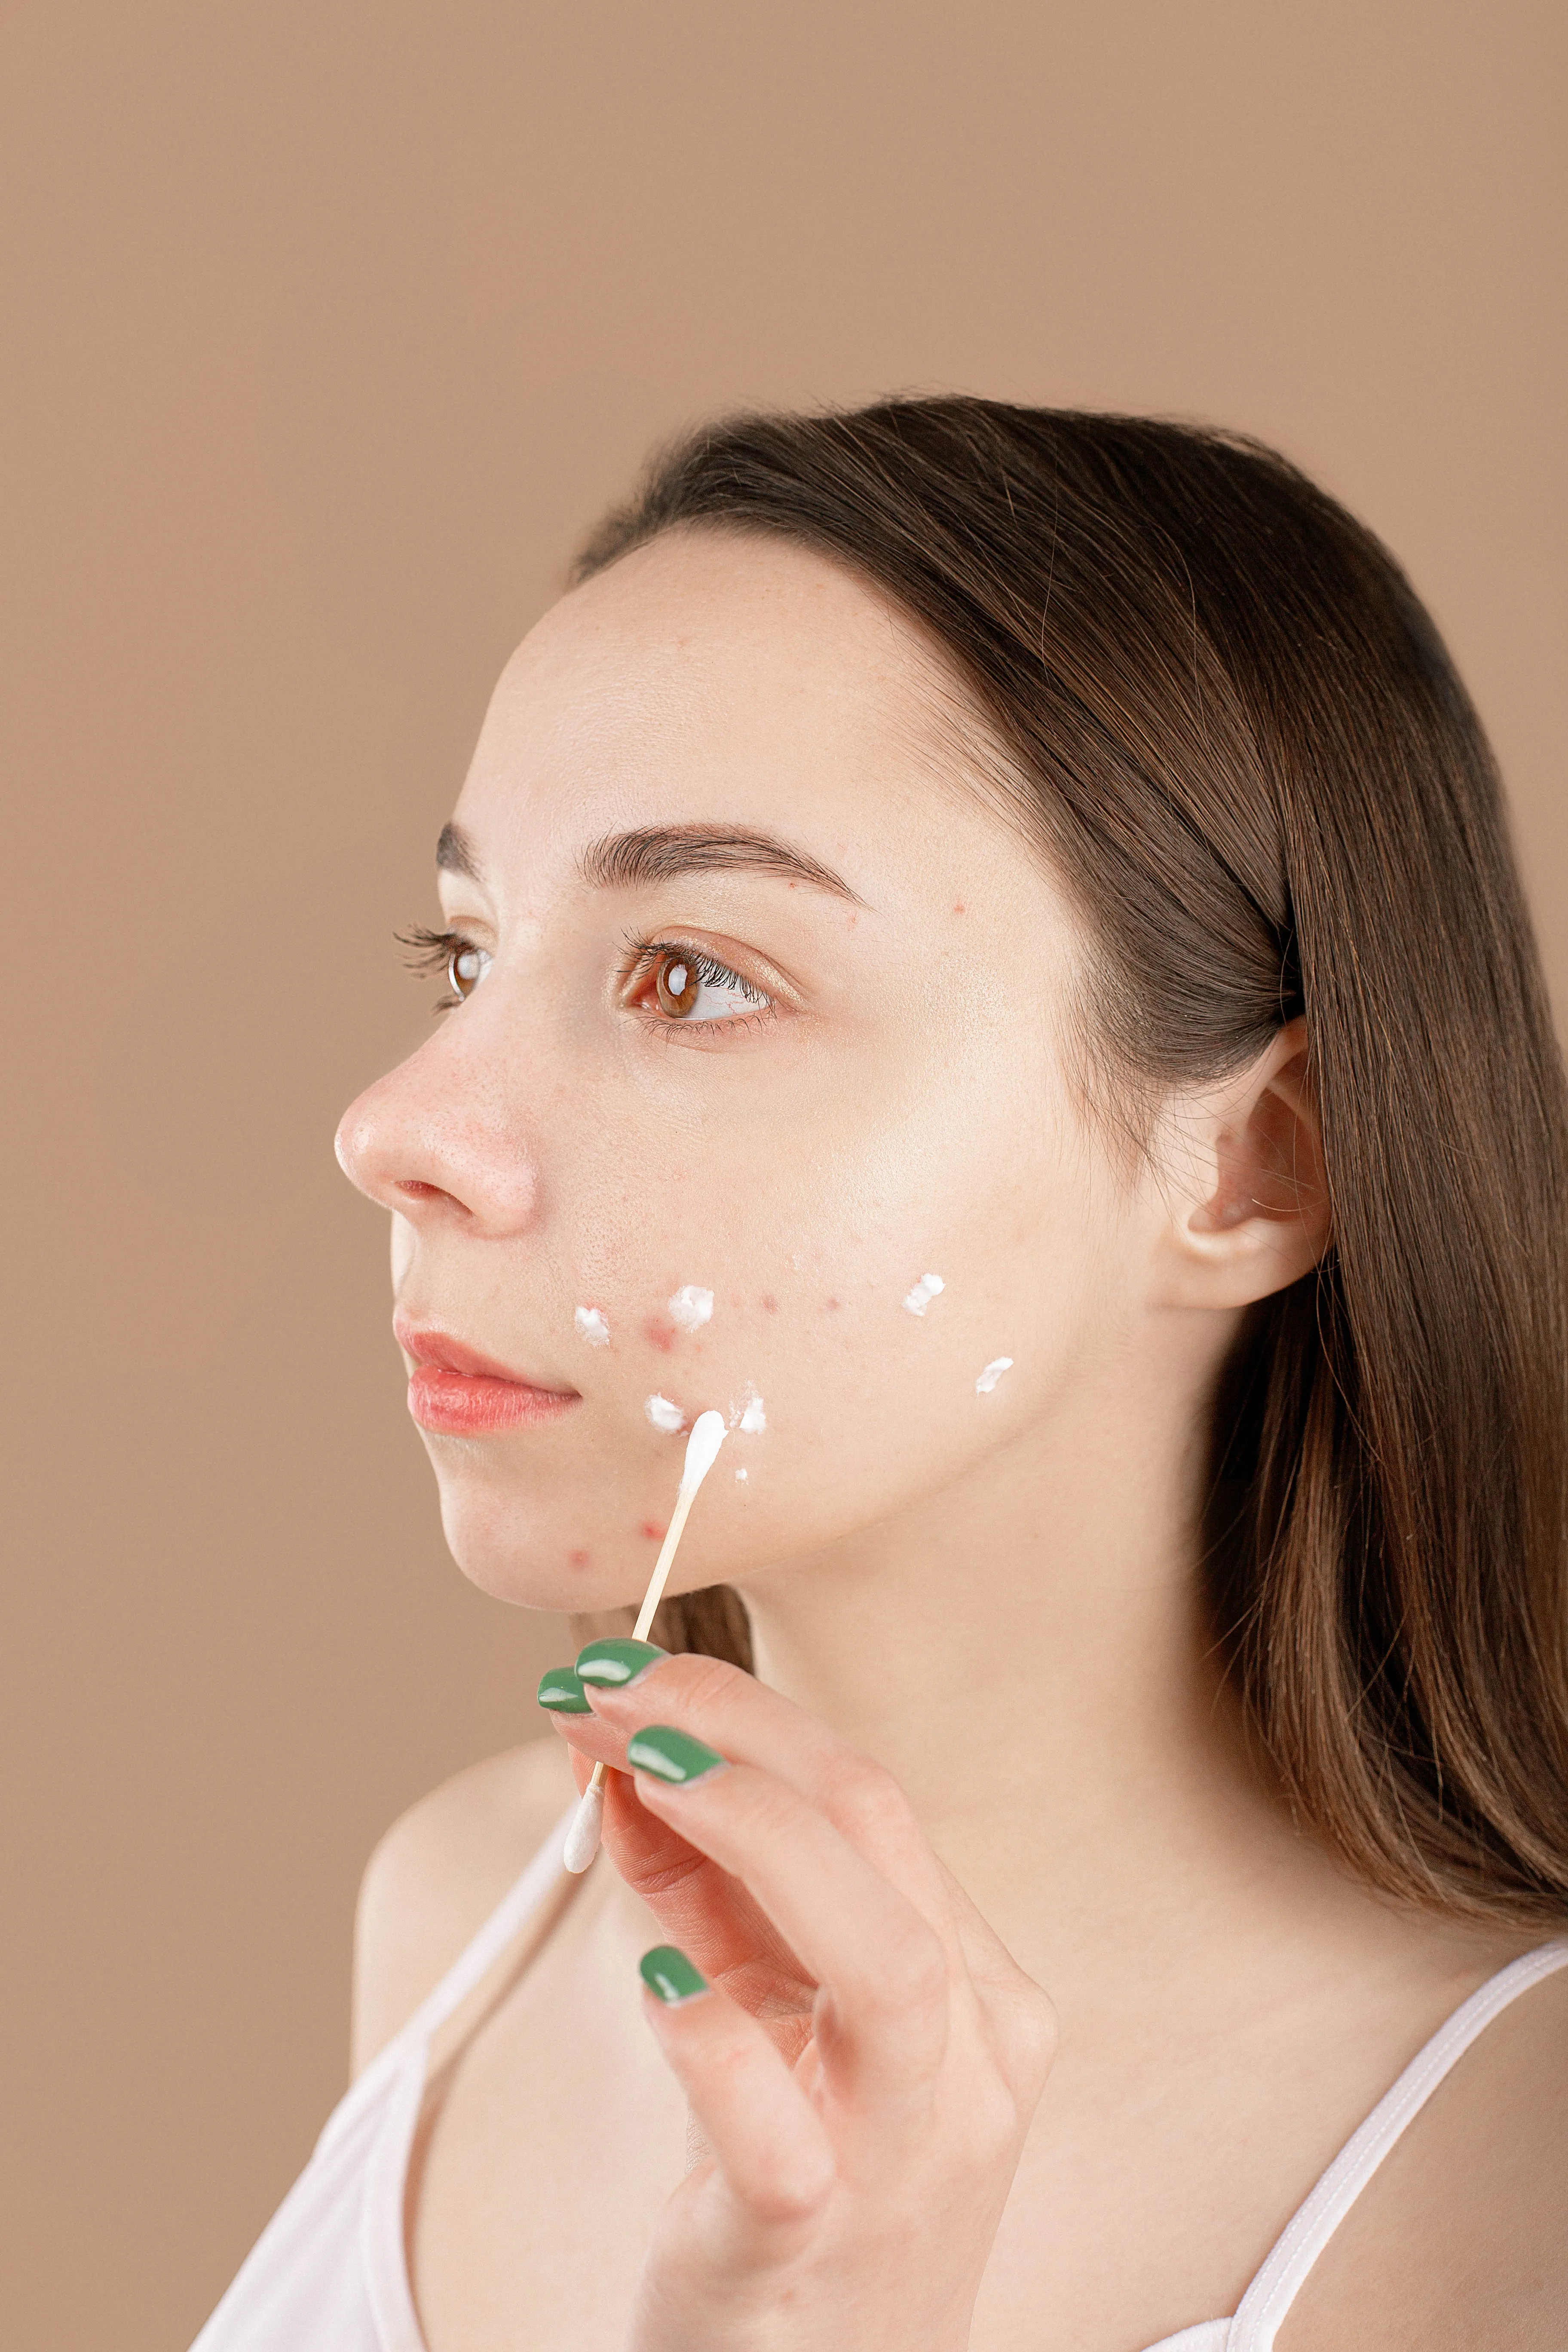 a woman applying medicine over pimples